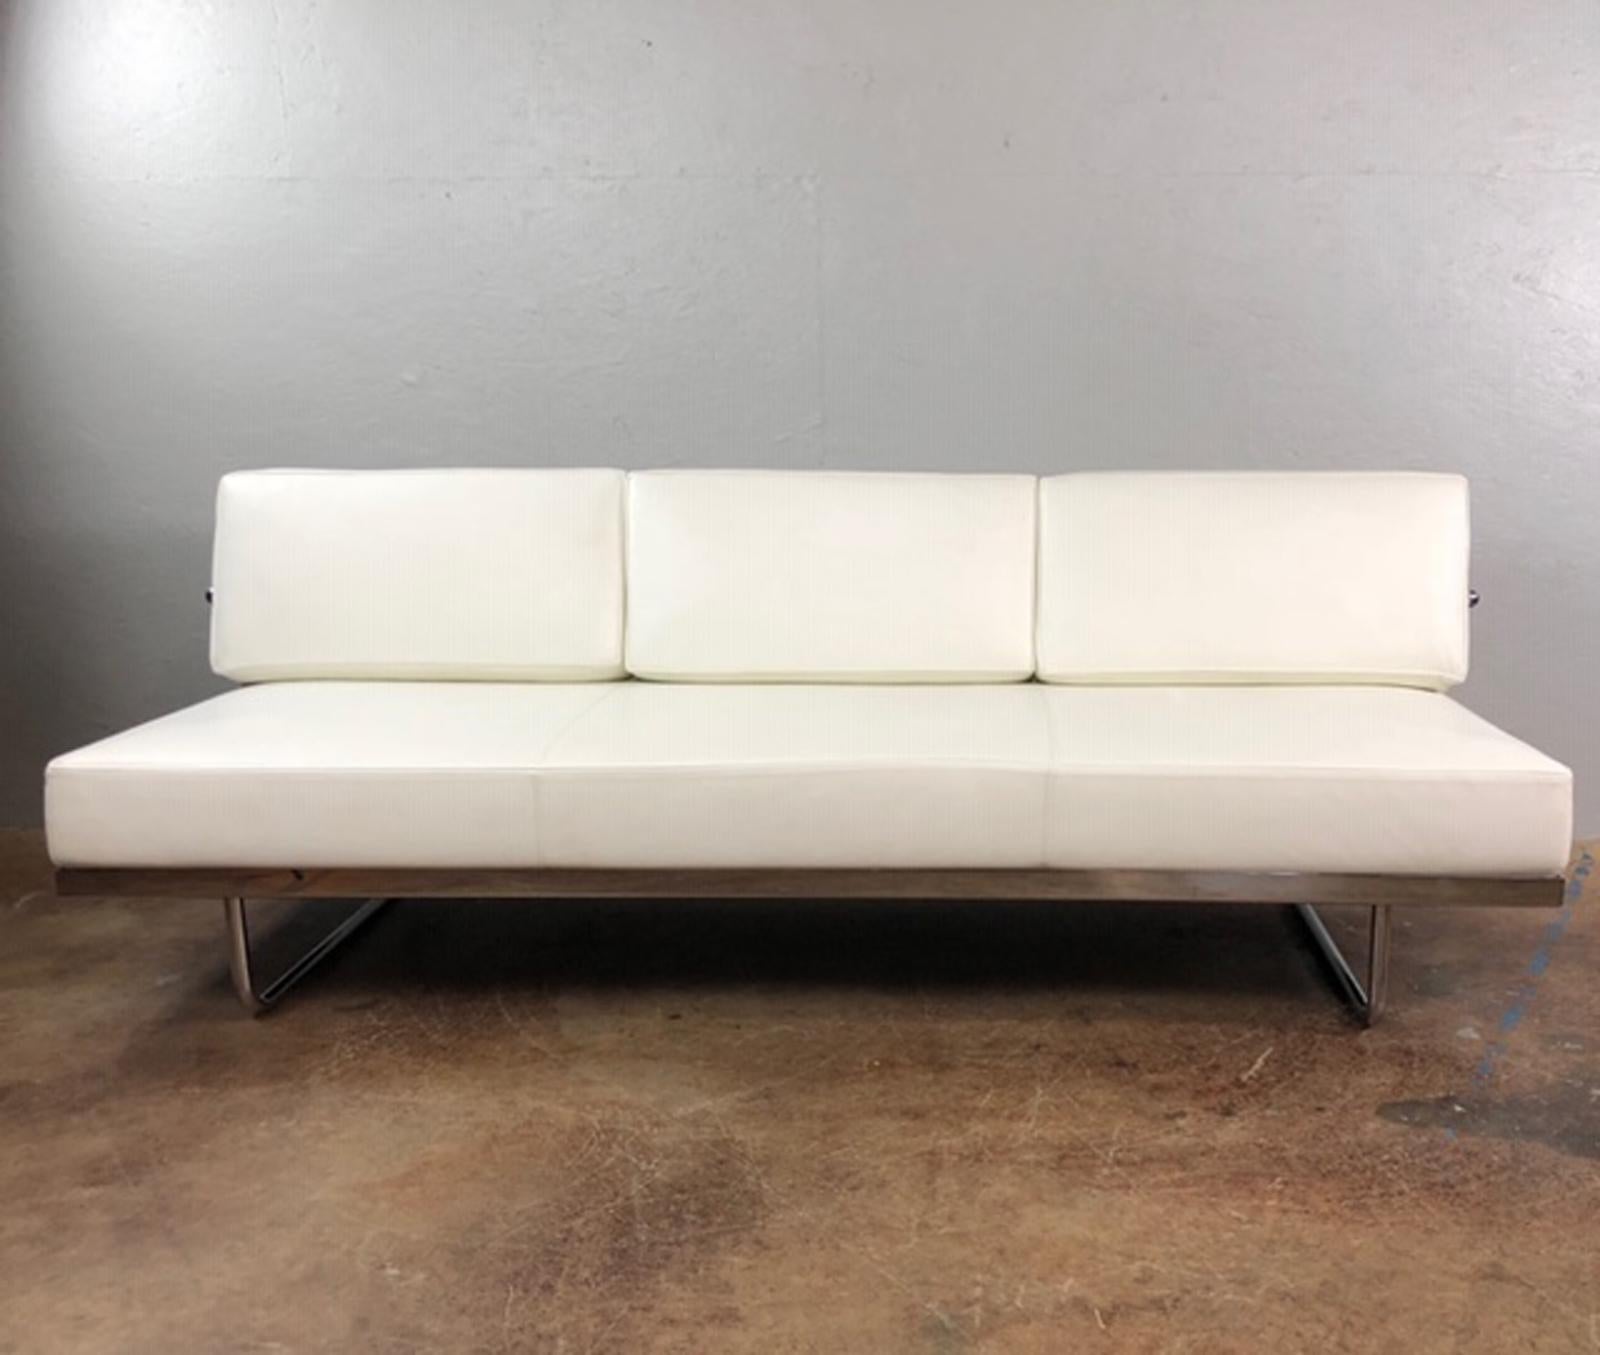 Cassina LC5.F Sofa by Le Corbusier, Pierre Jeanneret & Charlotte Perriand, 1934

It is amazing that sofa that was designed over 80 years ago is still a perfect choice for today's contemporary and modern style homes. Le Corbusier and Cassina have